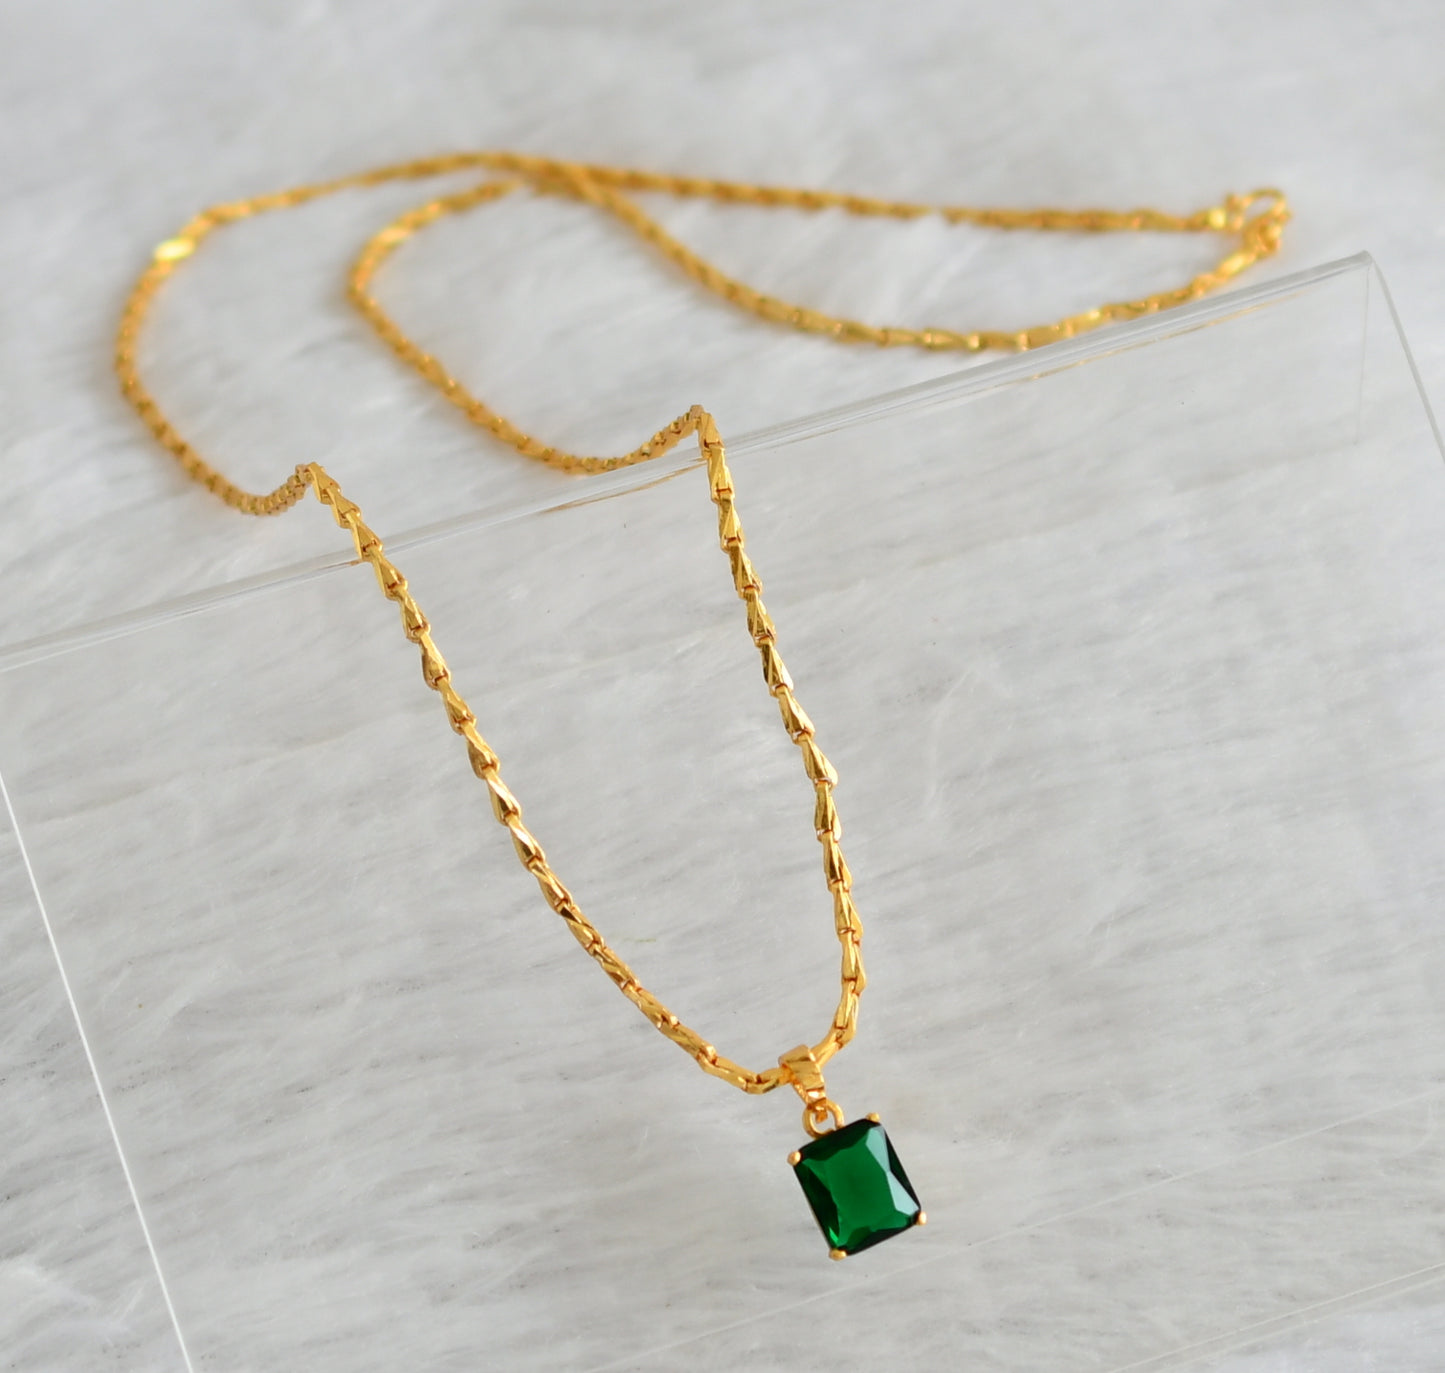 Gold tone 24 inches chain with green block stone pendant dj-47151